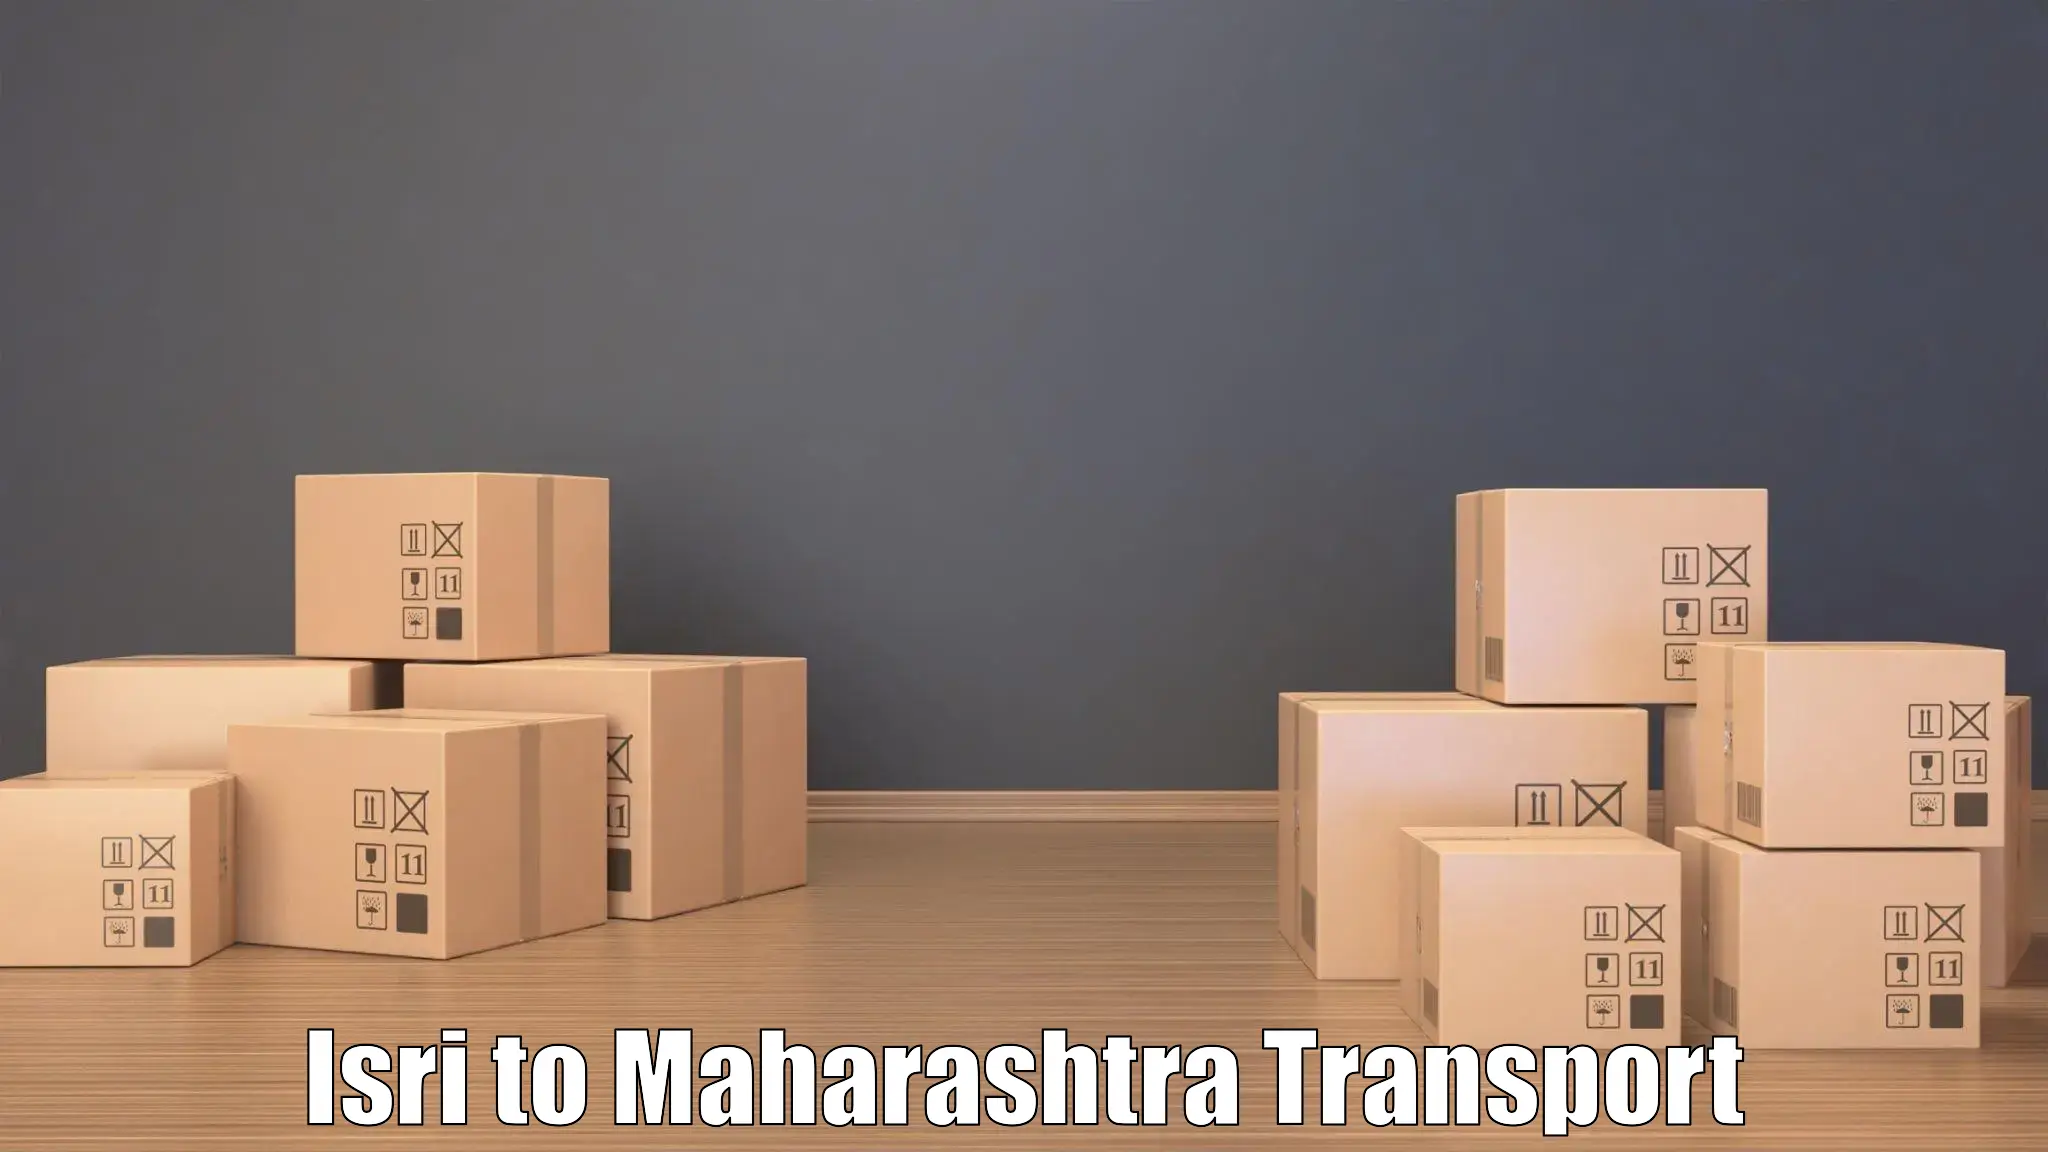 Luggage transport services in Isri to Chiplun